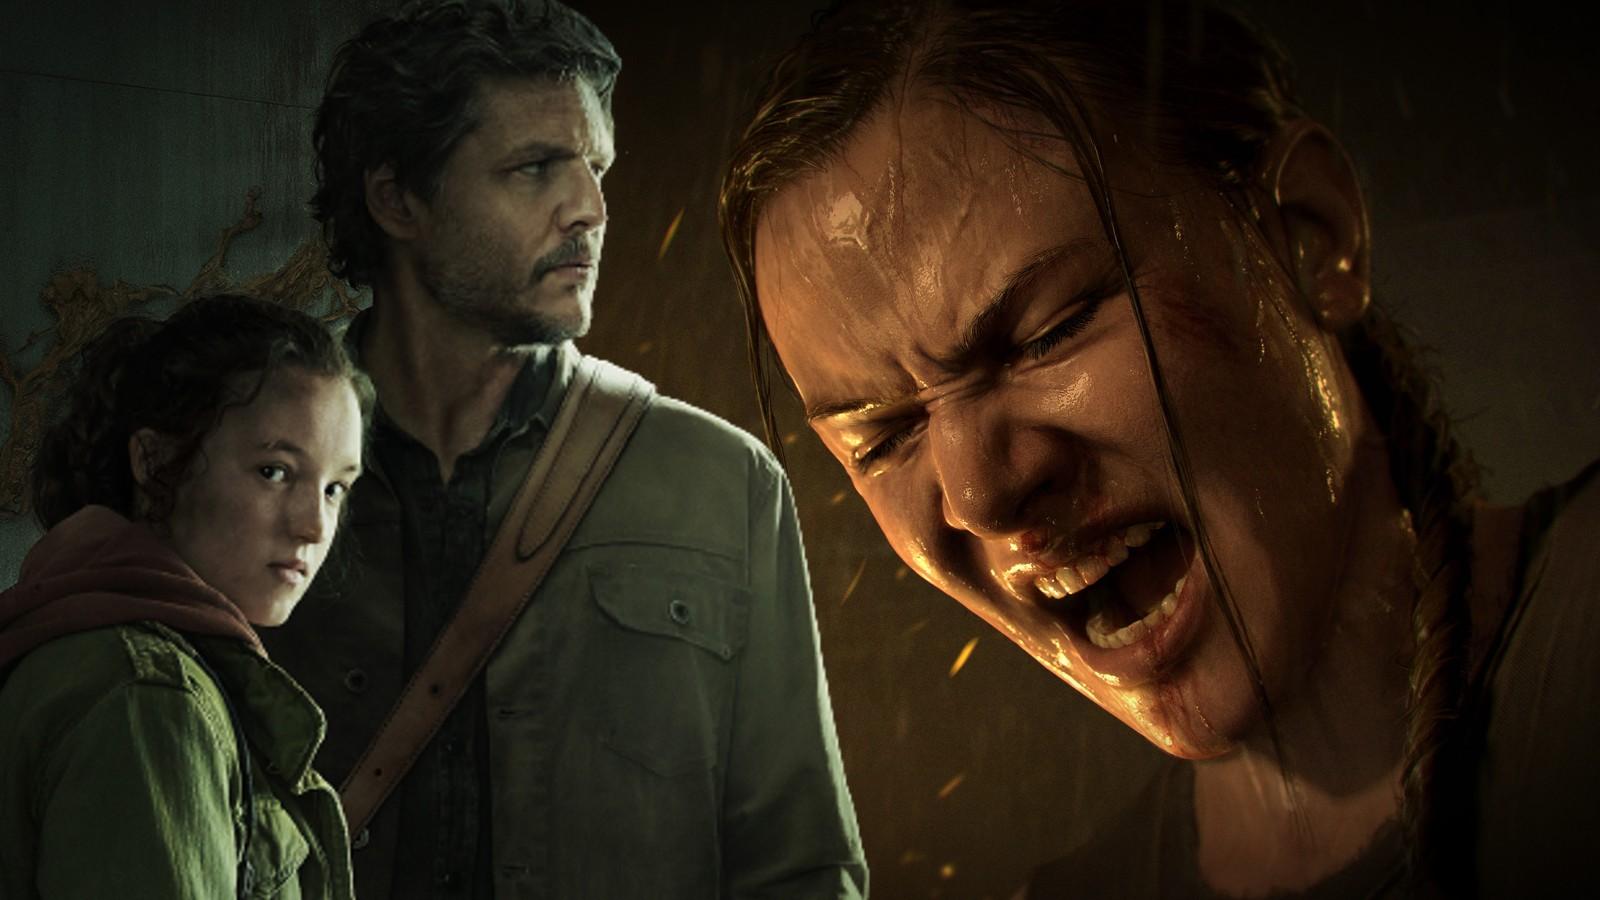 The Last of Us Season 2's Abby: 8 Best Actors to Play the Villain